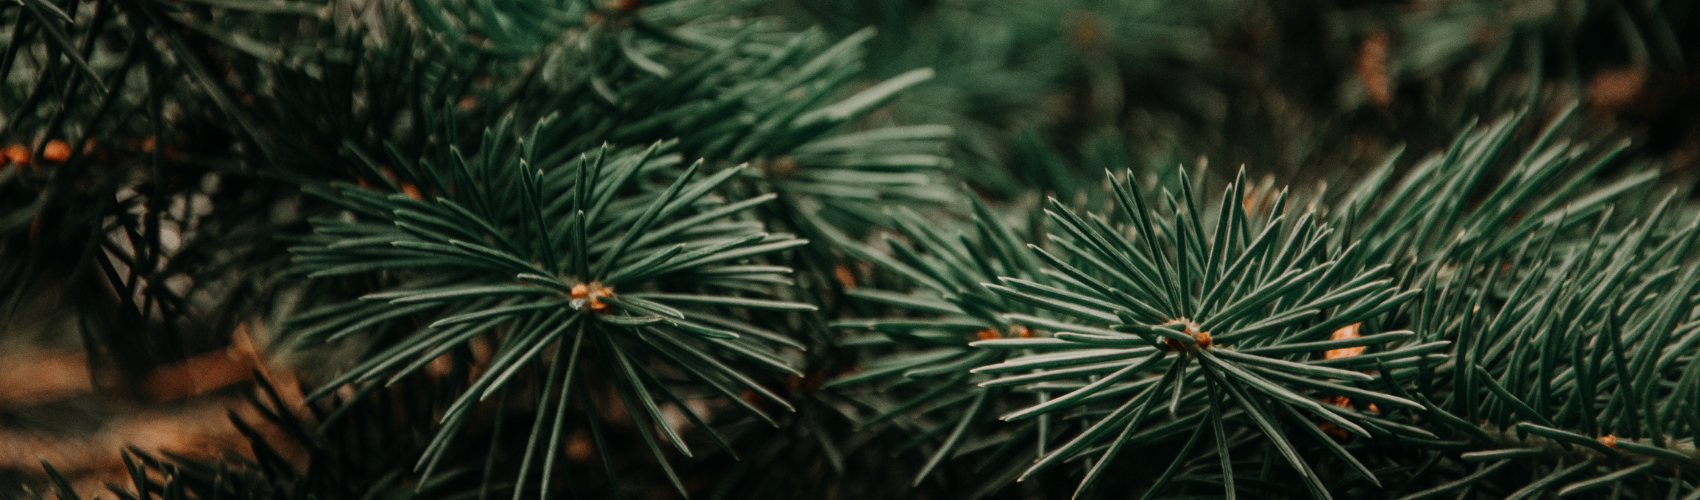  Top tips to keep your Christmas tree in shape 